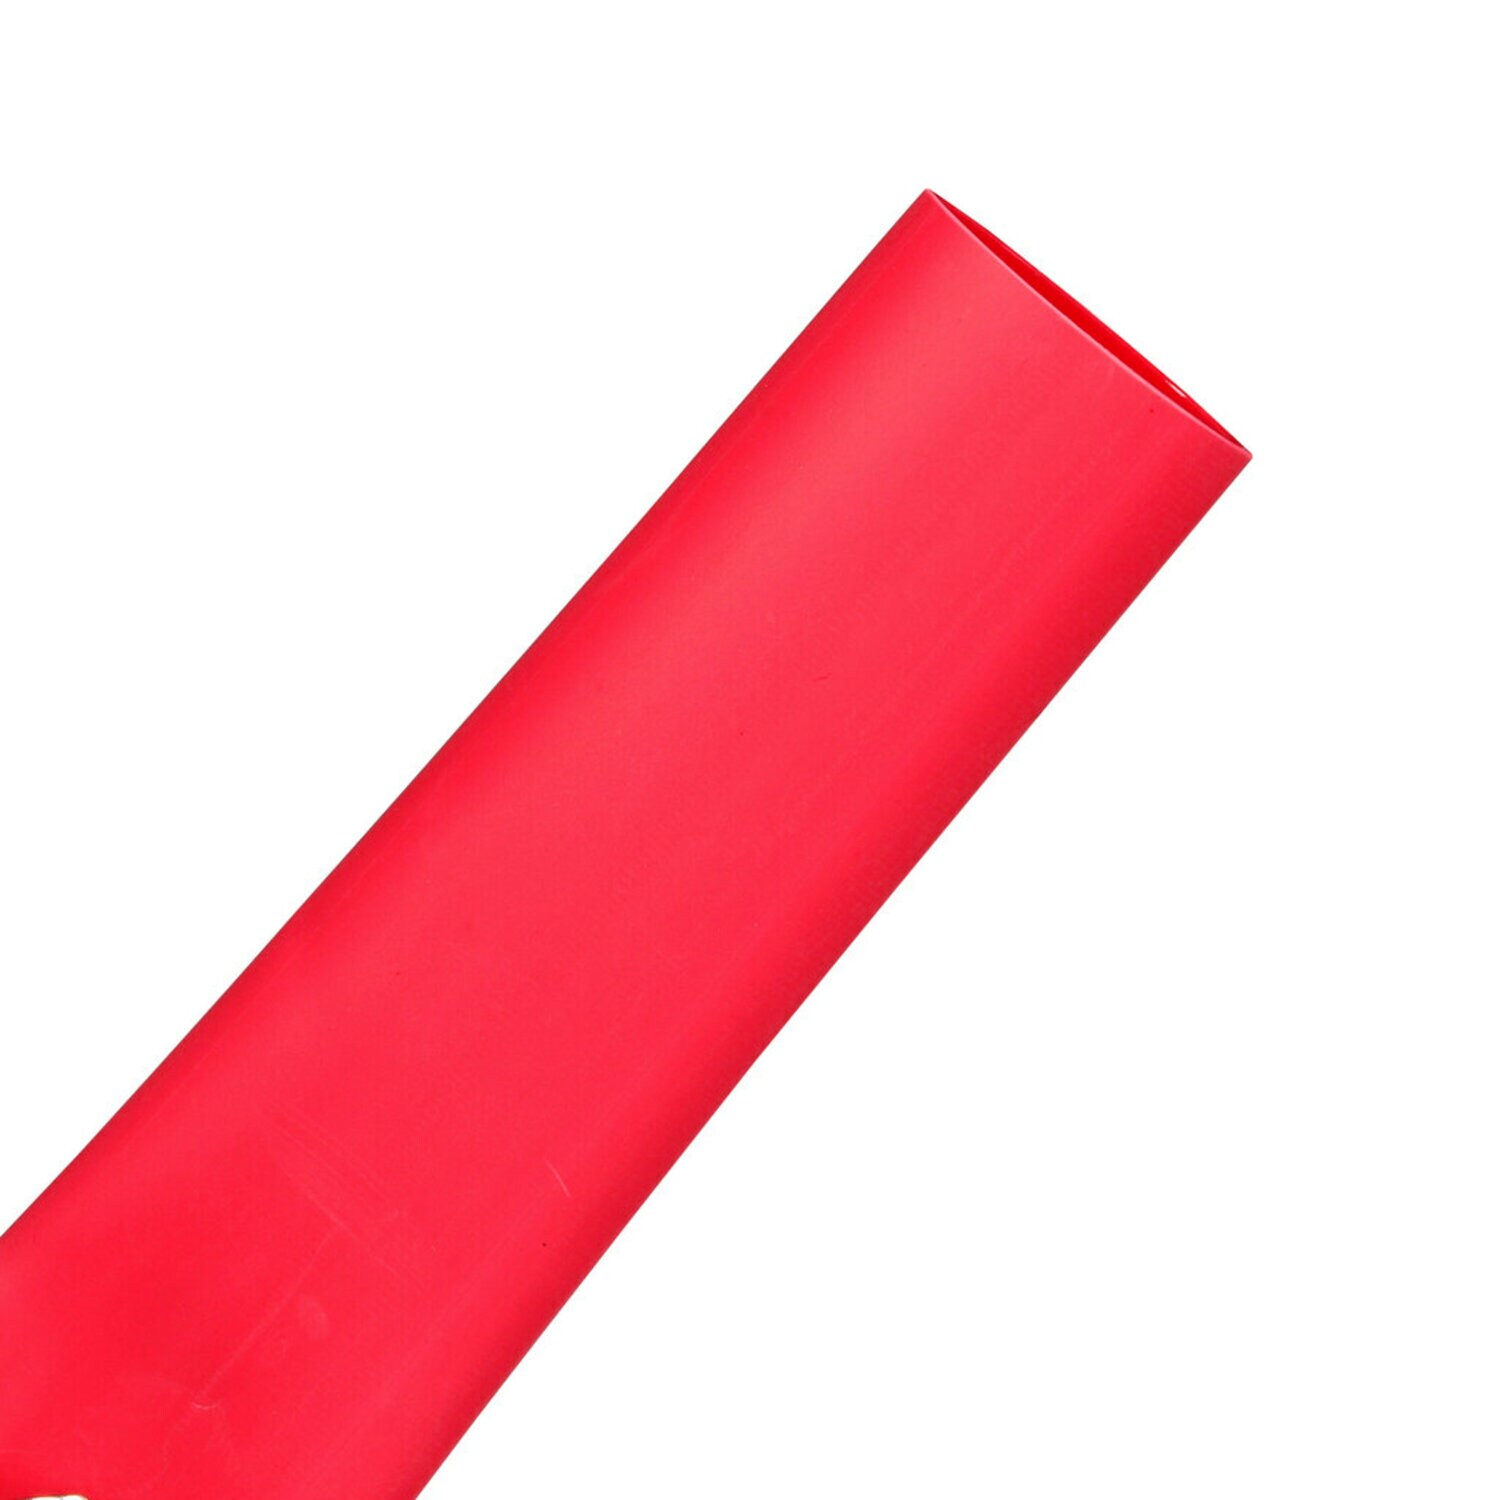 7010398980 - 3M Thin-Wall Heat Shrink Tubing EPS-300, Adhesive-Lined, 1-6"-Red, 6 in
length pieces, 10 pieces/pack, 10 Packs/Case